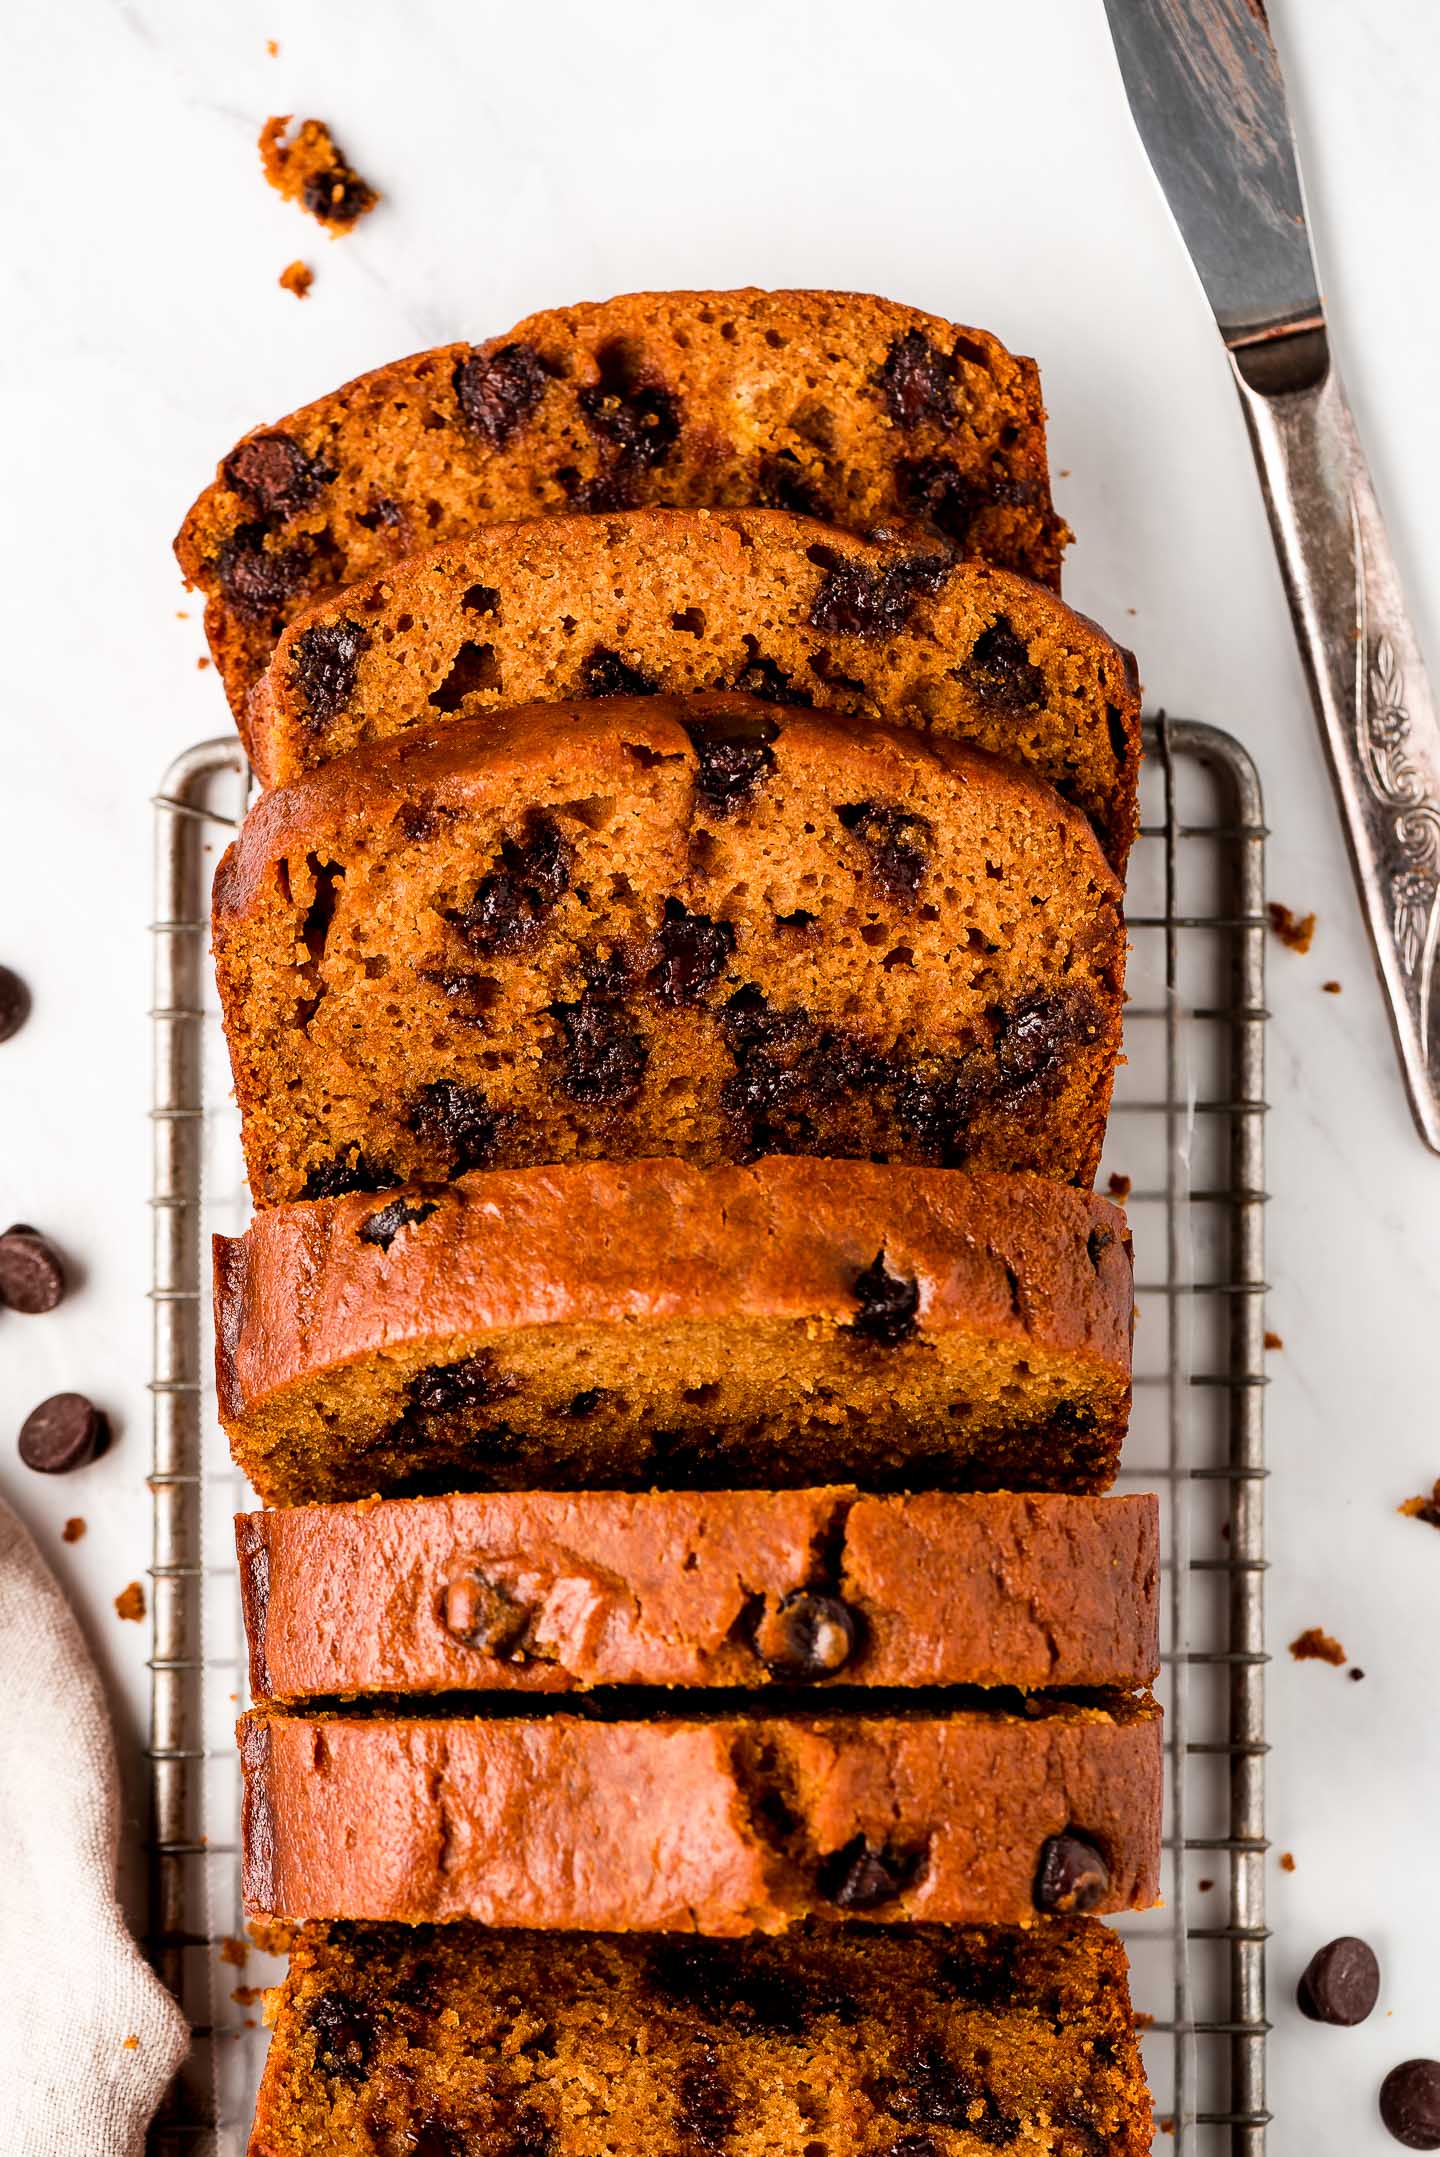 Pumpkin Chocolate Chip Bread sliced and showing moist inside studded with chocolate chips.